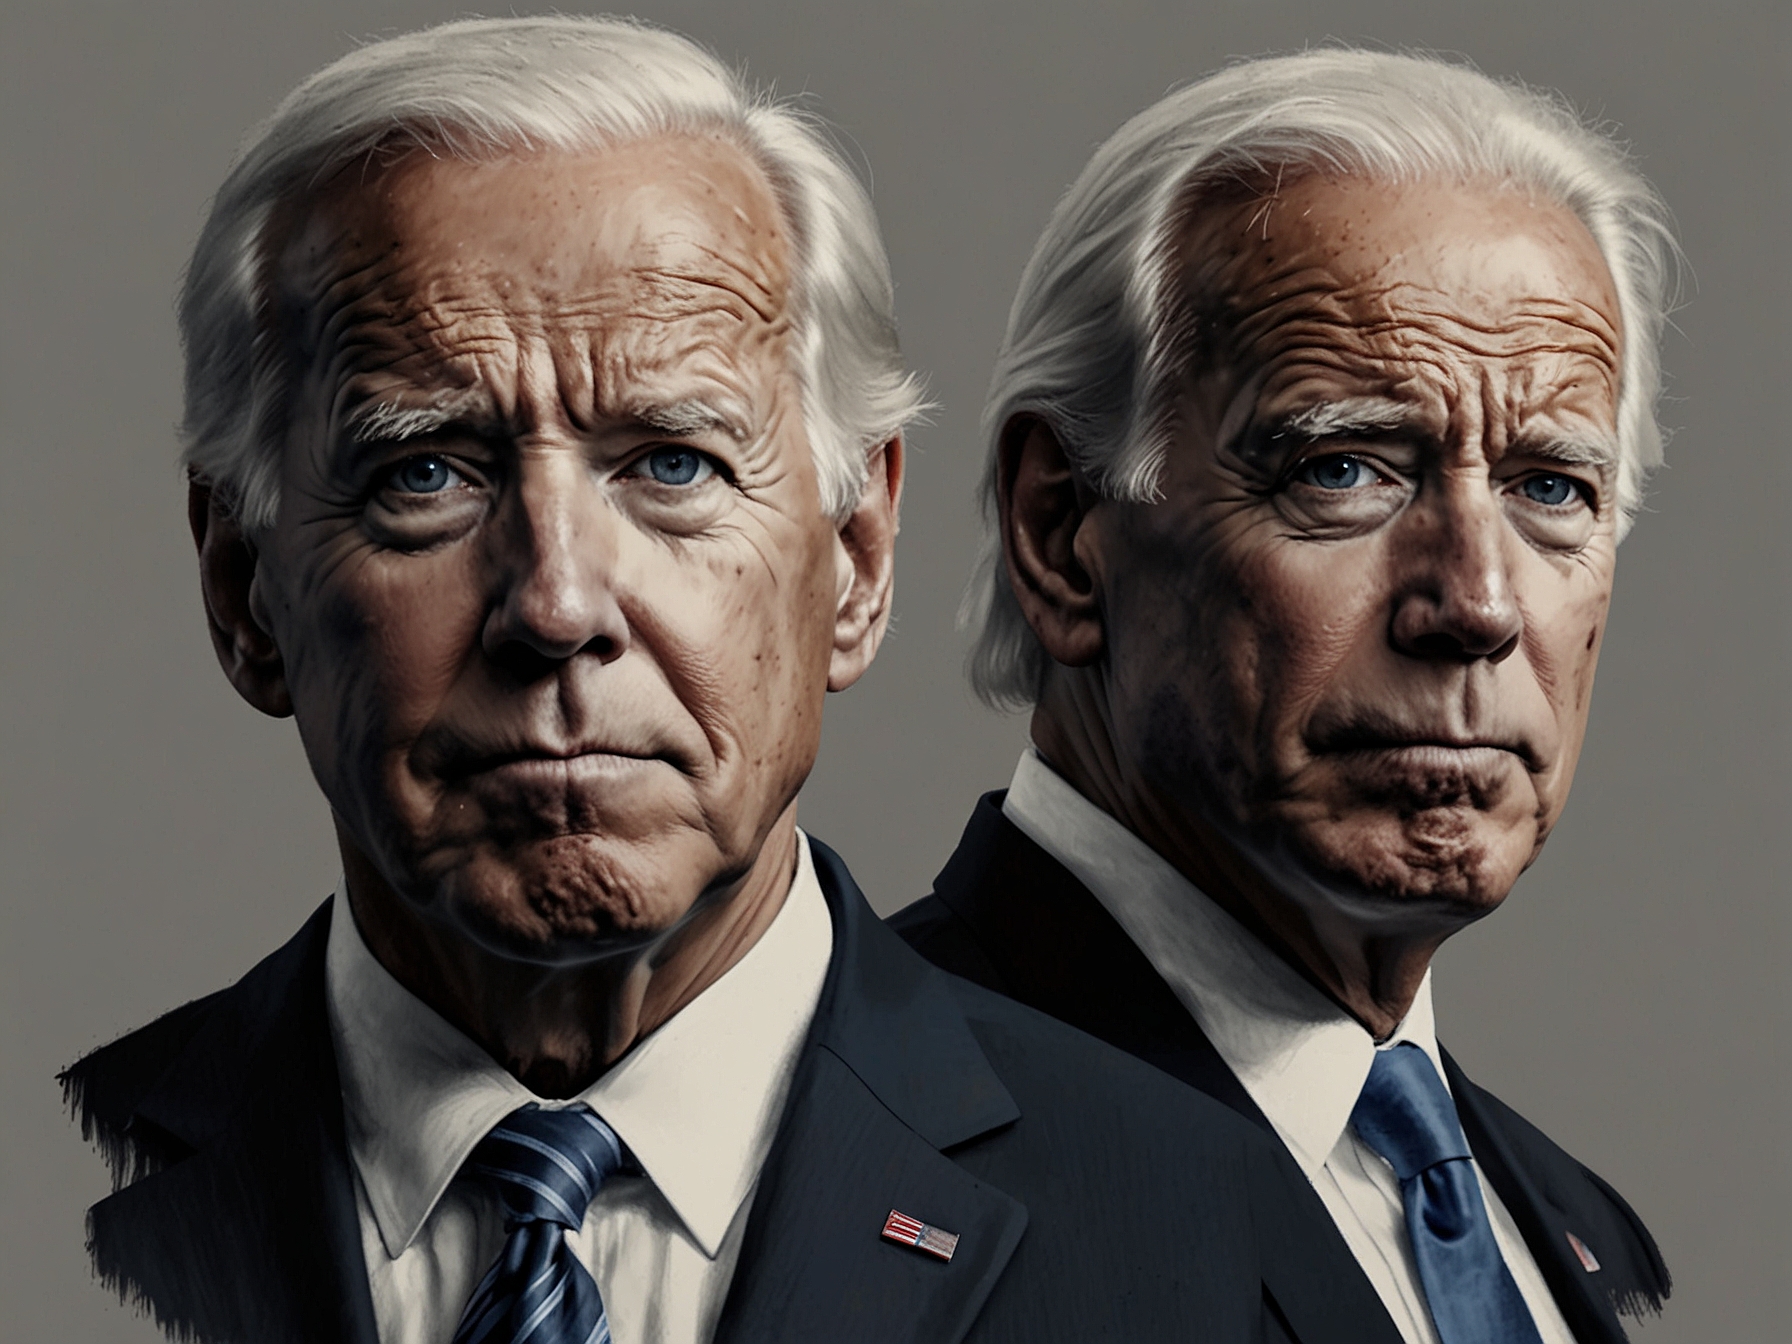 A split-screen image showing Joe Biden and Donald Trump during the CNN debate. Biden appears tired and confused, while Trump looks assertive, highlighting the stark contrast in their performances.